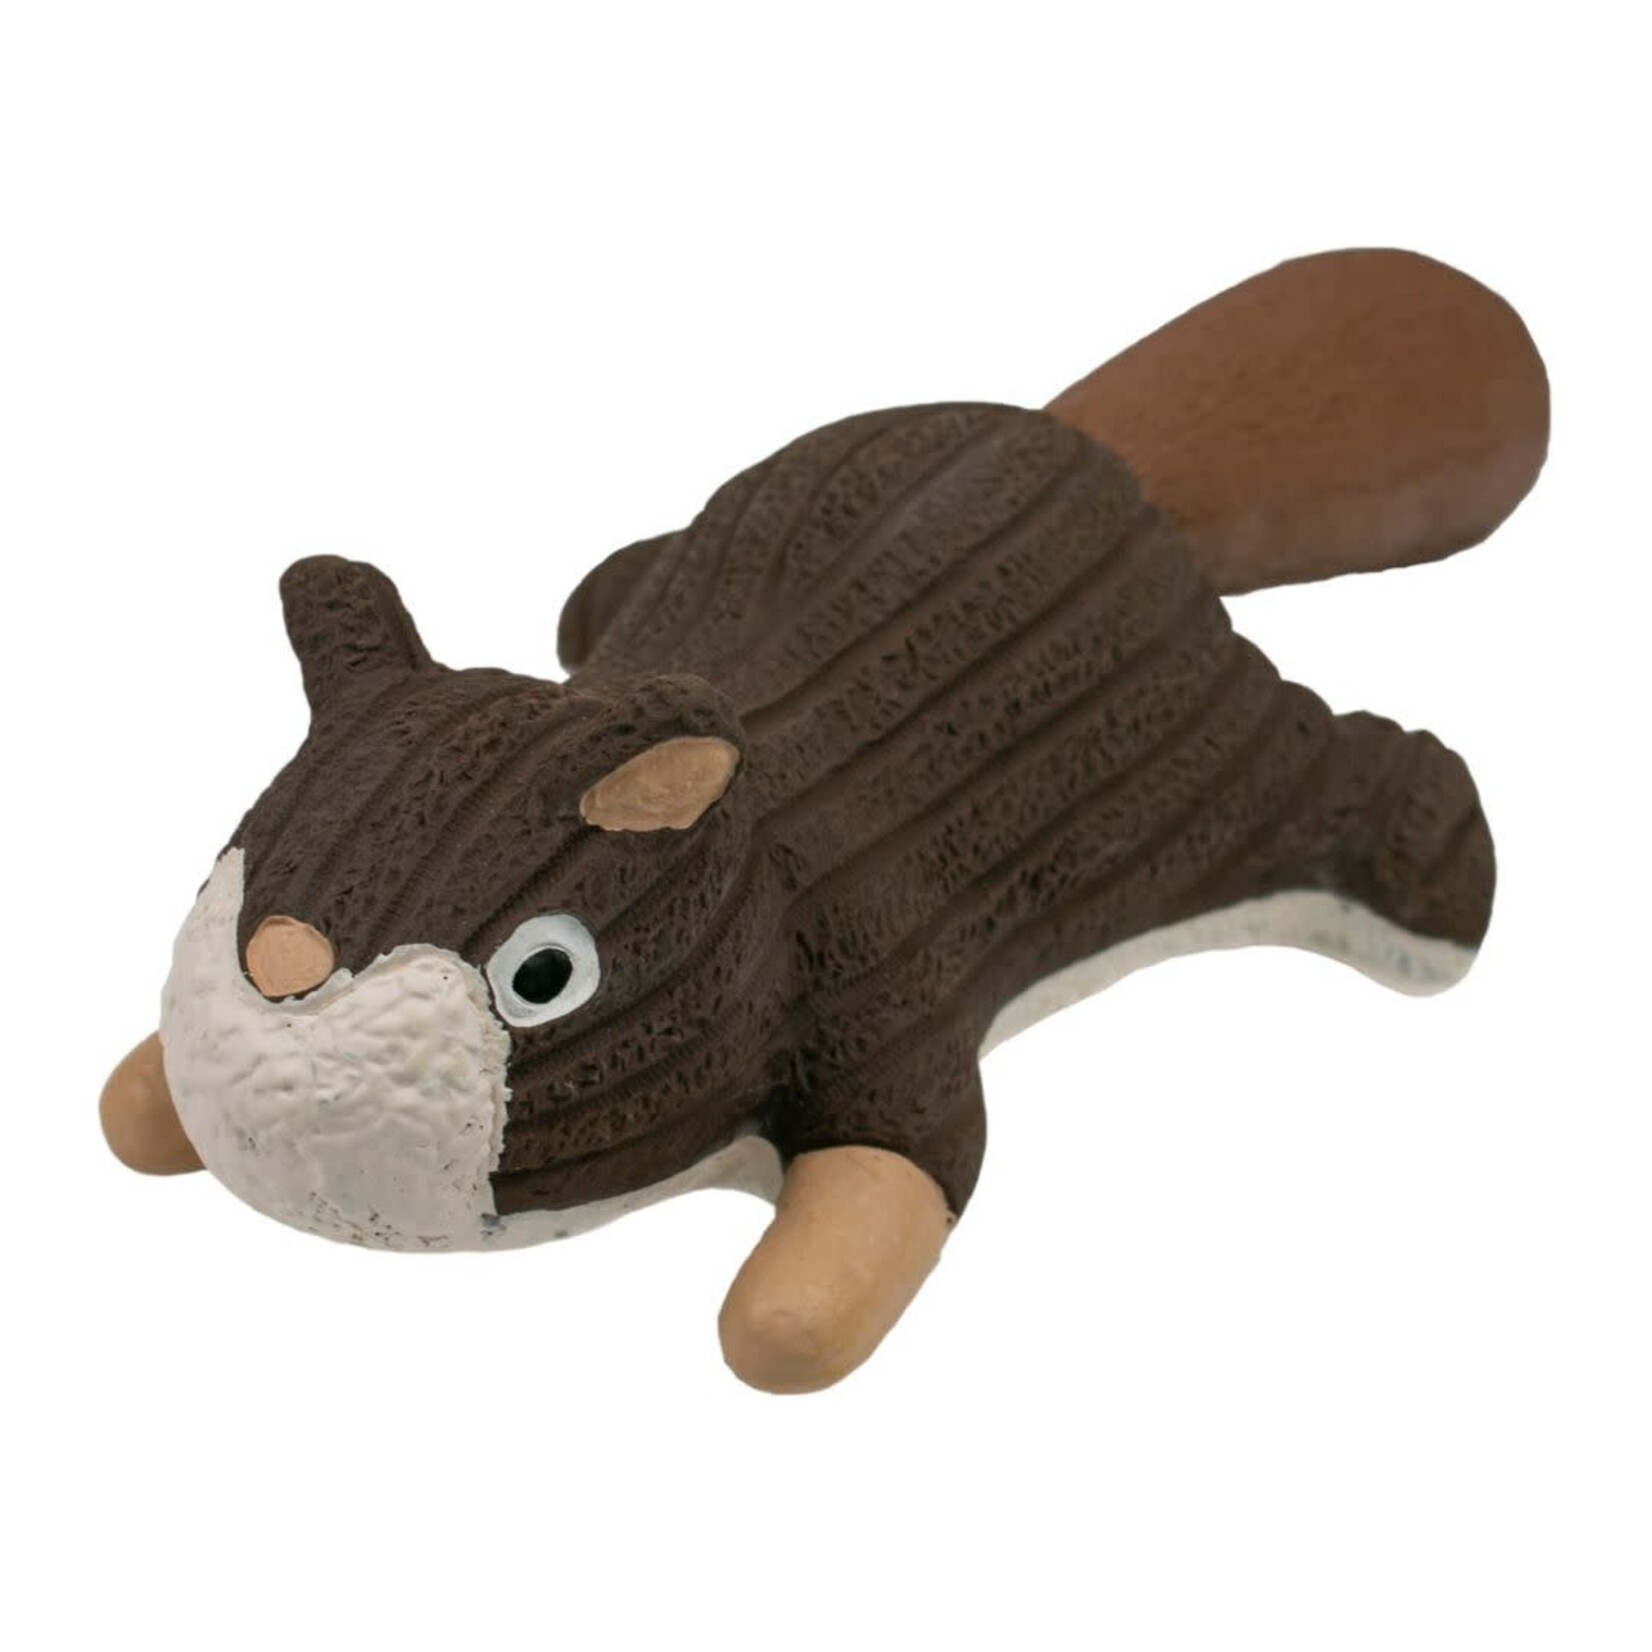 Tall Tails Tall Tails Squirrel Latex Squeaker Dog Toy